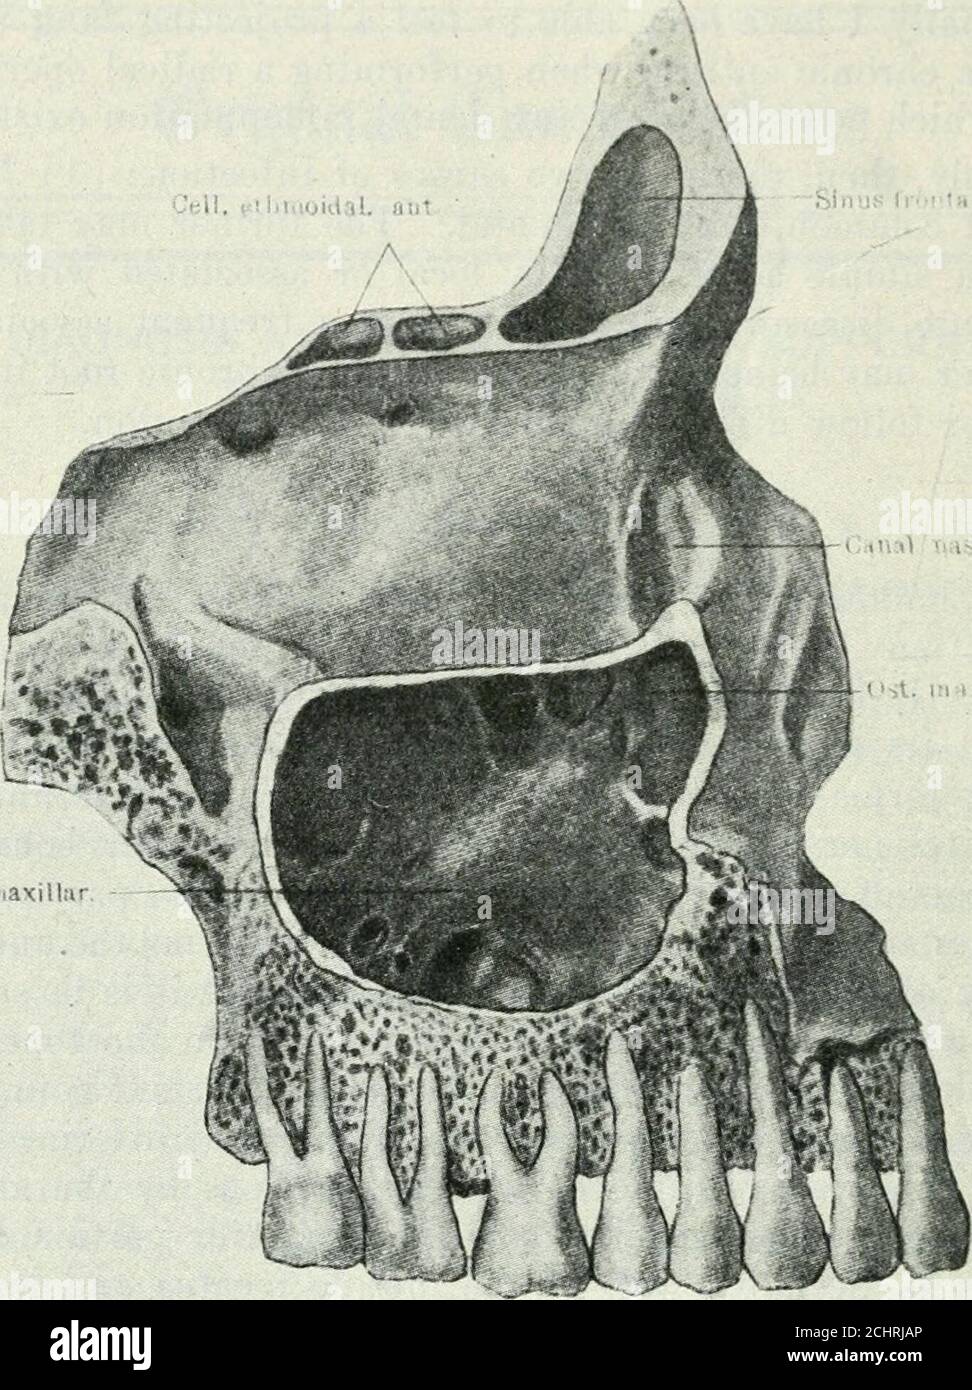 . The Canadian journal of medicine and surgery . e most important boundary,corresponds to the outer wall of the middle and inferior nasalmeati. This wall is divided into two portions by the attach-ment of the inferior turbinal bone, the superior portion corre-sponding to the outer wall of the middle meatus and leavingin its upper and back part an opening, the natural ostium, whilethe lower part is in relation to the outer wall of the inferiormeatus and is marked by a slight ridge showing the situationof the lower end of the lacrymo-nasal duct. The upper por-tion is thin and composed of both bo Stock Photo